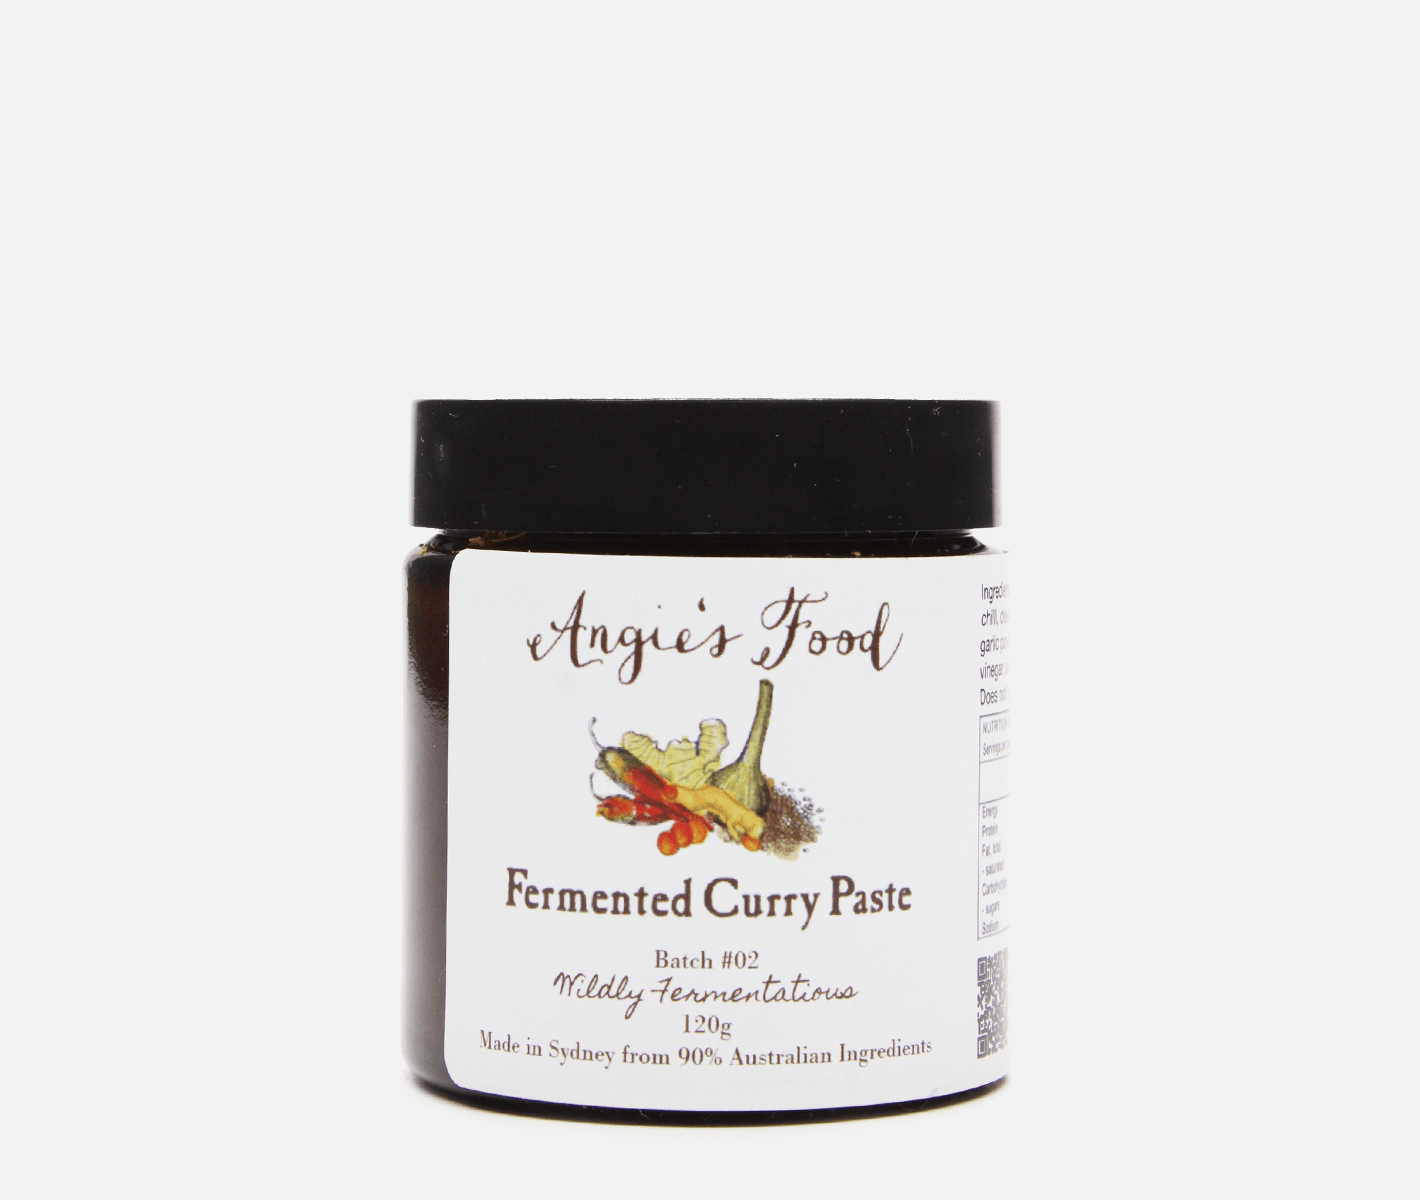 Angie's Food Fermented Curry Paste (120g) - DRNKS